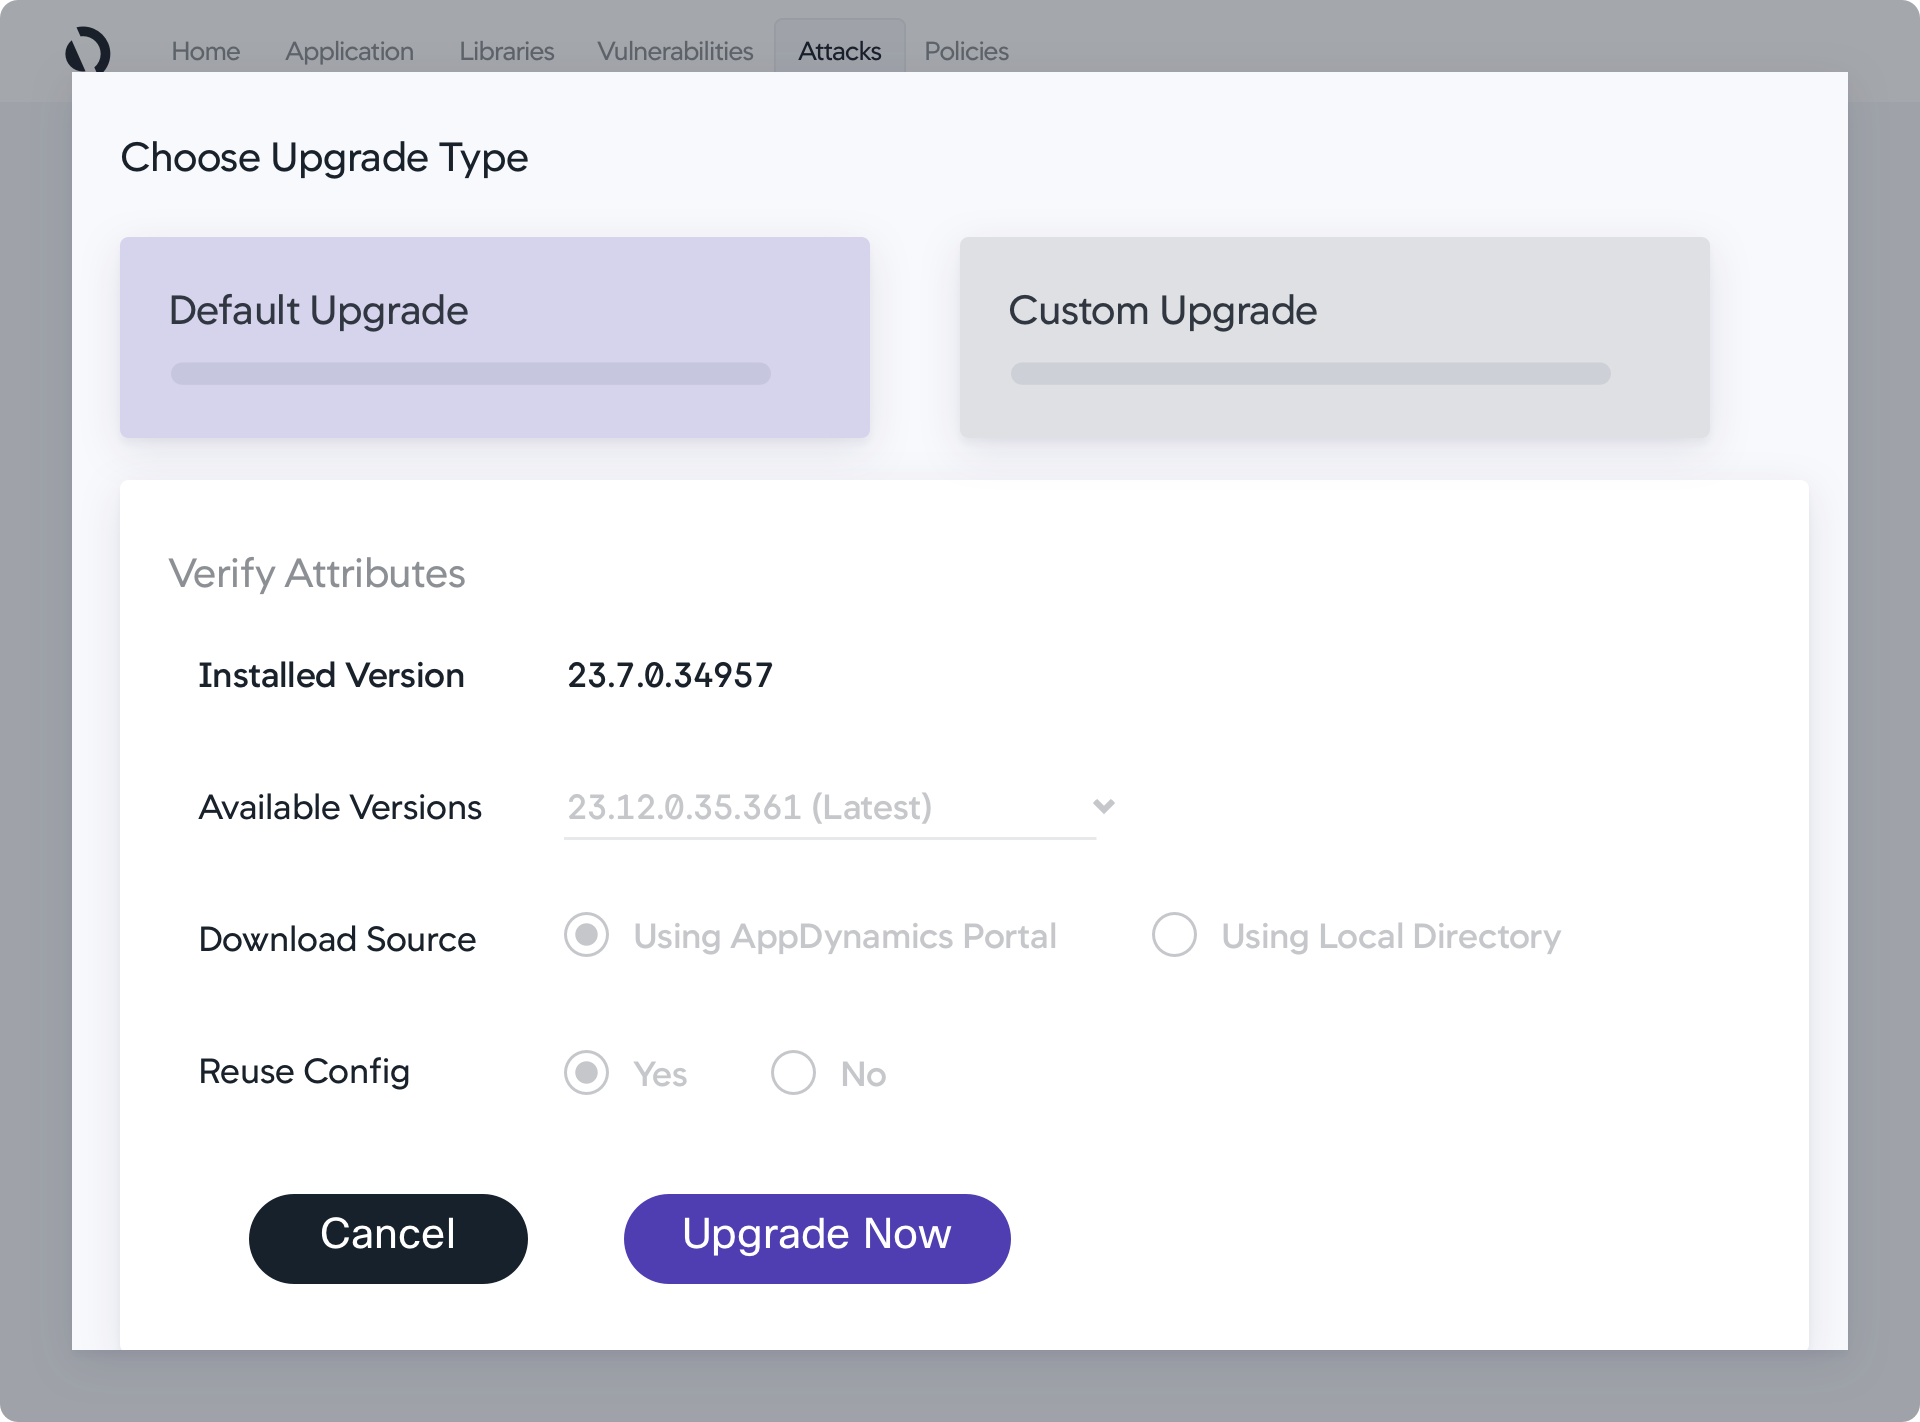 Quickly access new capabilities faster with push-button upgrades